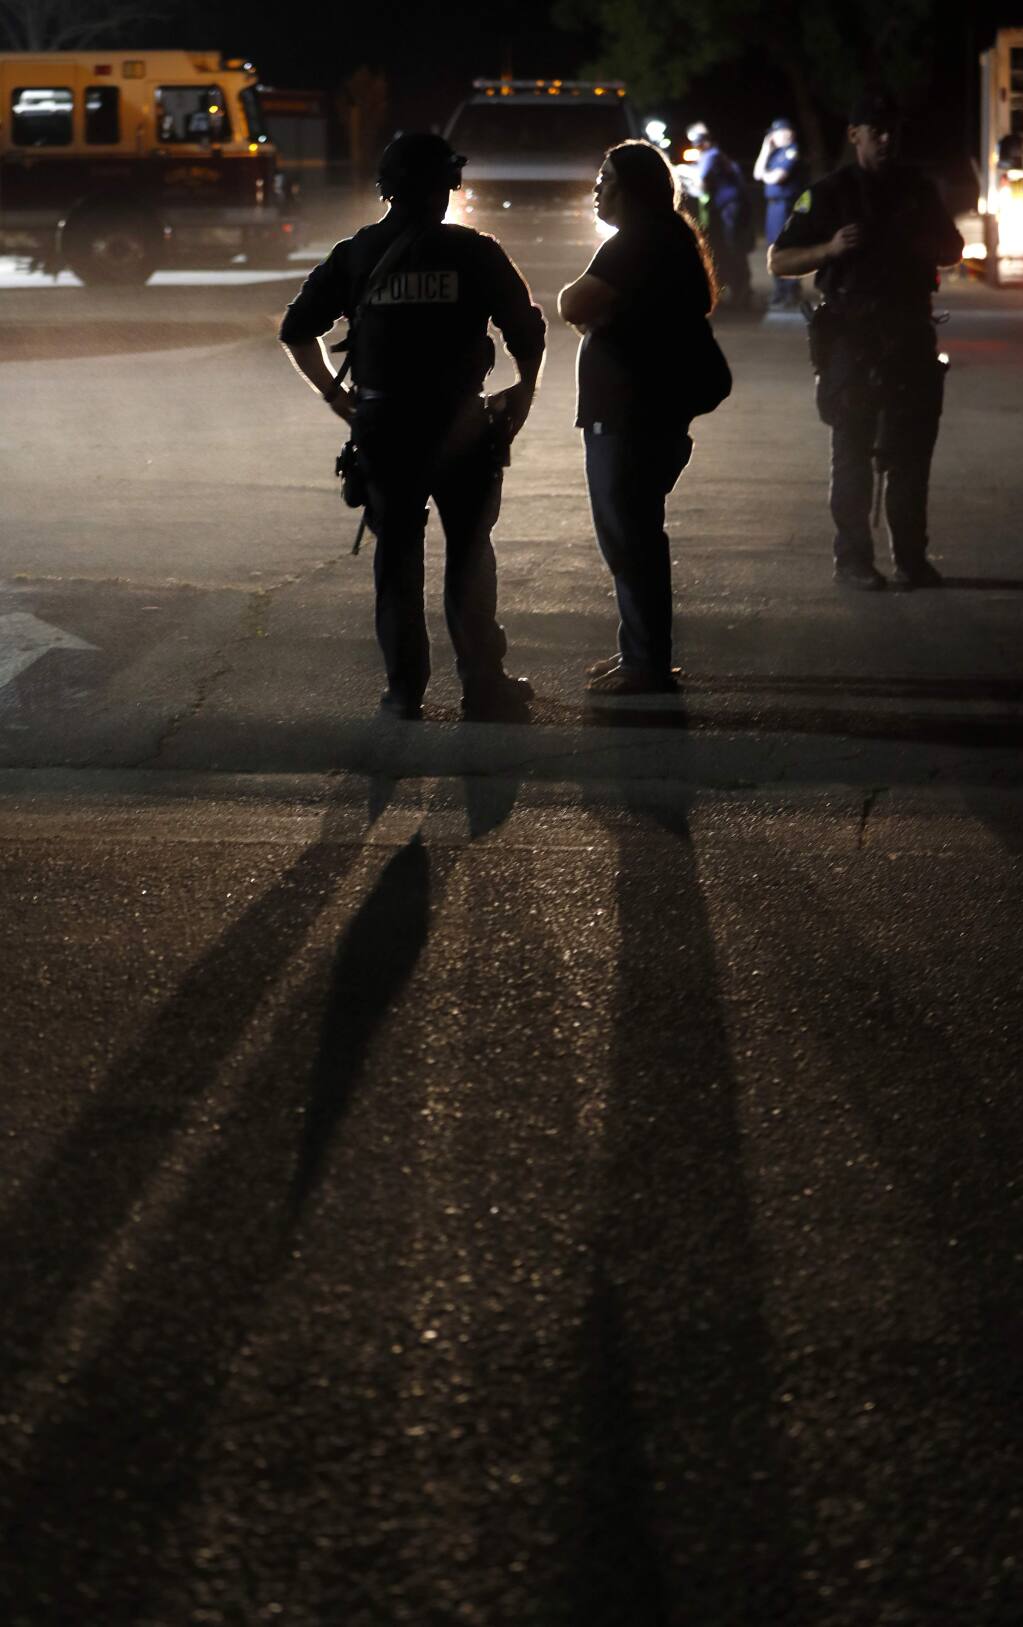 A police officer speaks to a man who was at the Gilroy Garlic Festival following a deadly shooting at the festival at Gilroy High School in Gilroy, Calif., on Sunday, July 28, 2019. (Nhat V. Meyer/Bay Area News Group)